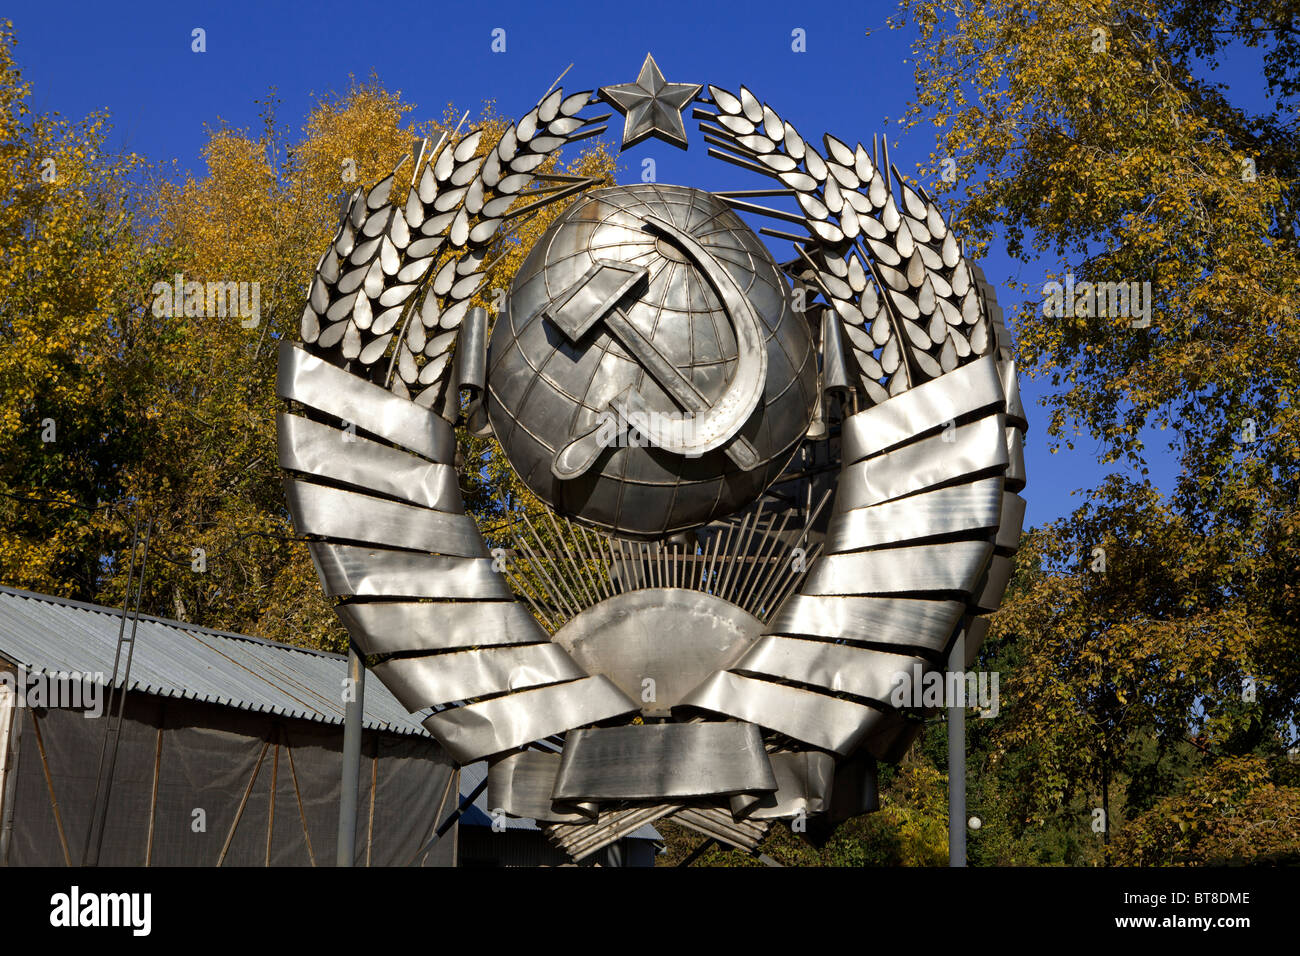 The hammer and sickle (communist symbols of the past) at the Fallen  Monument Park (Muzeon Park of Arts) in Moscow, Russia Stock Photo - Alamy